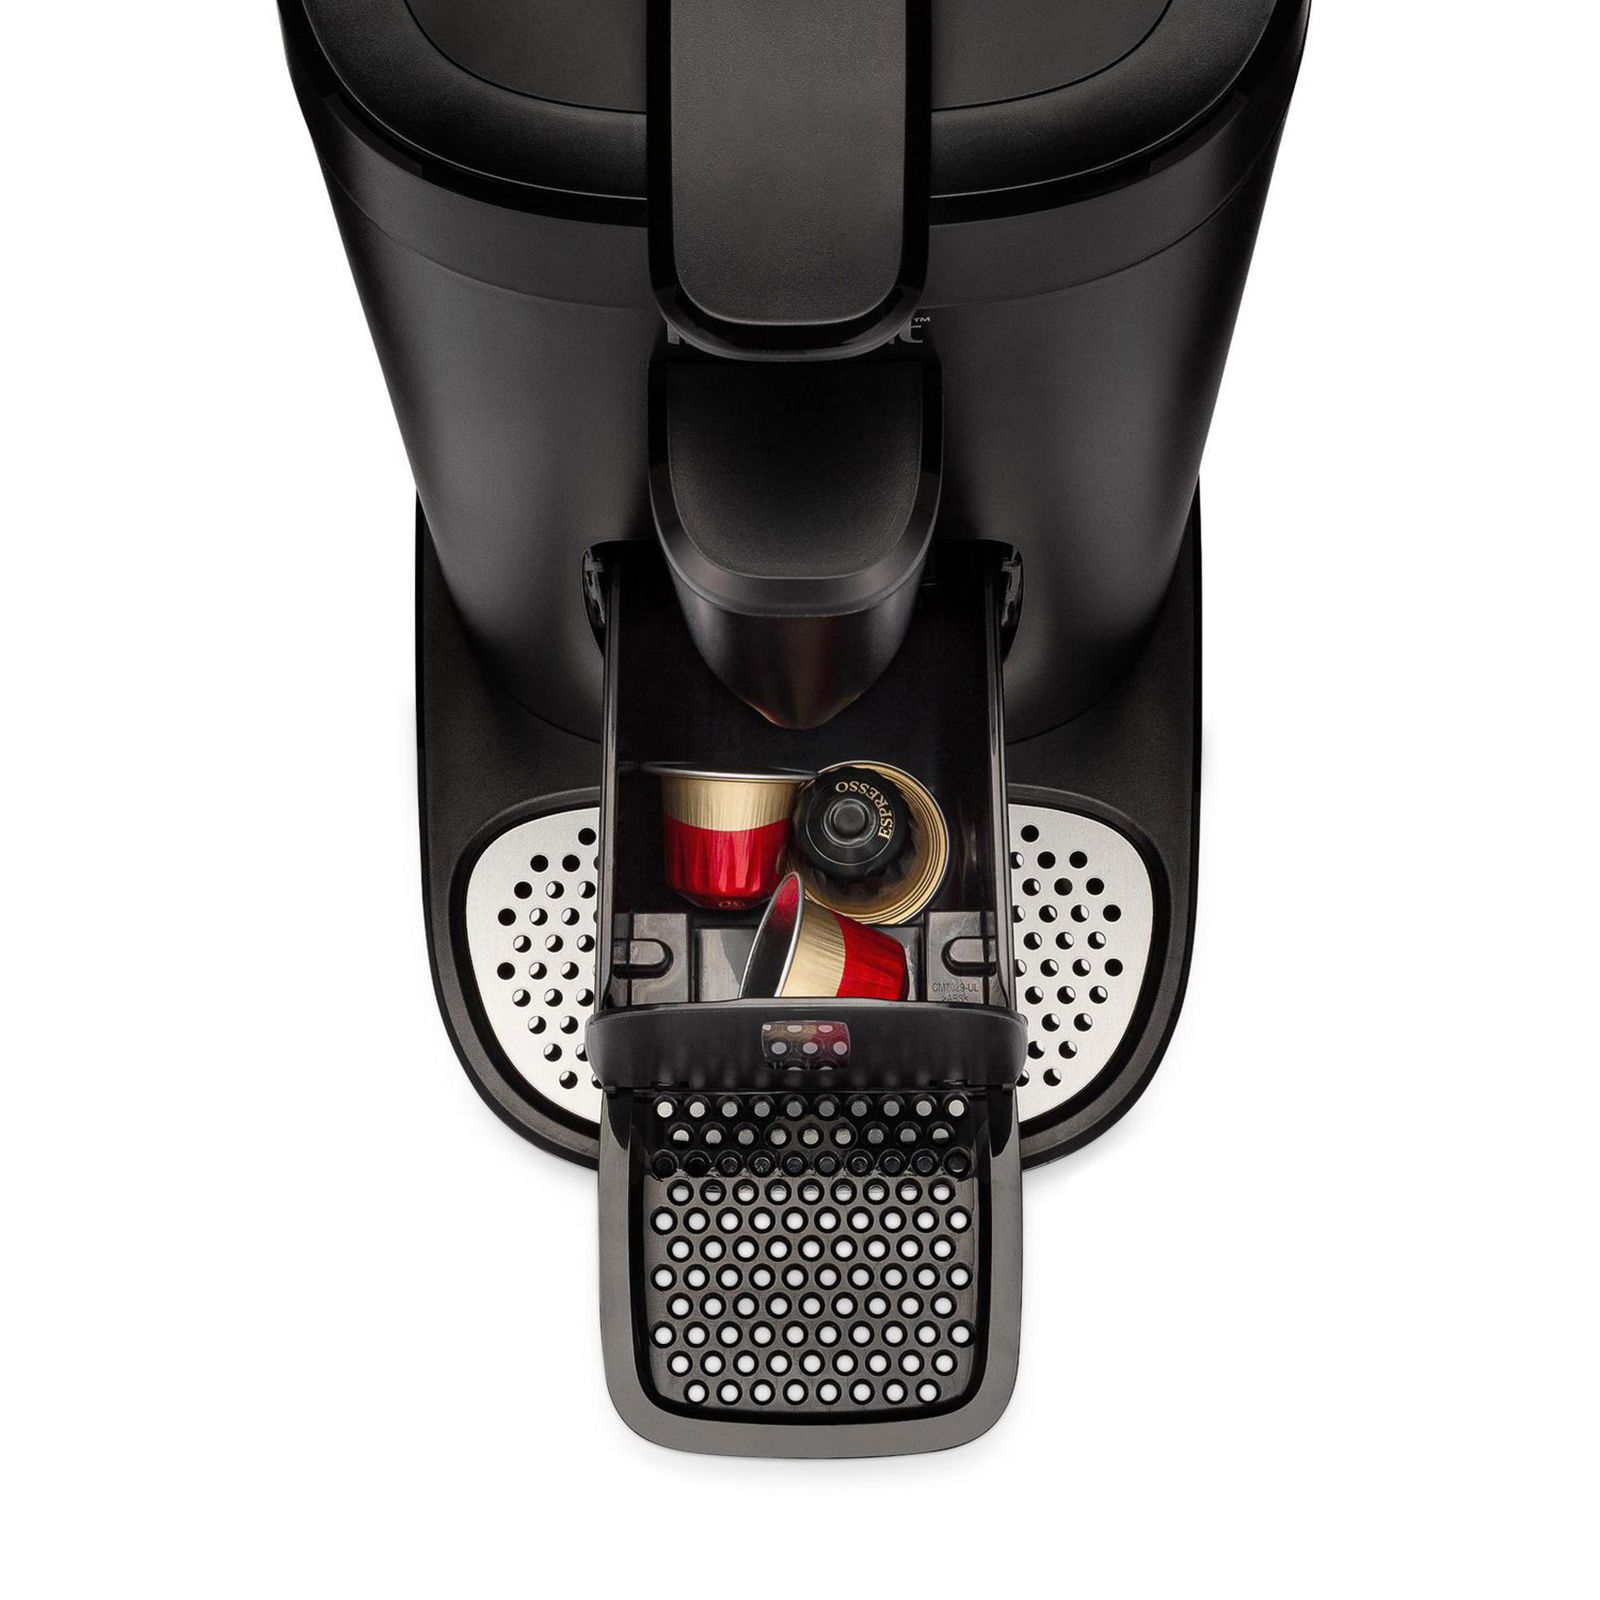 Instant Pot Nespresso and K-Cups Dual Pod Coffee Maker